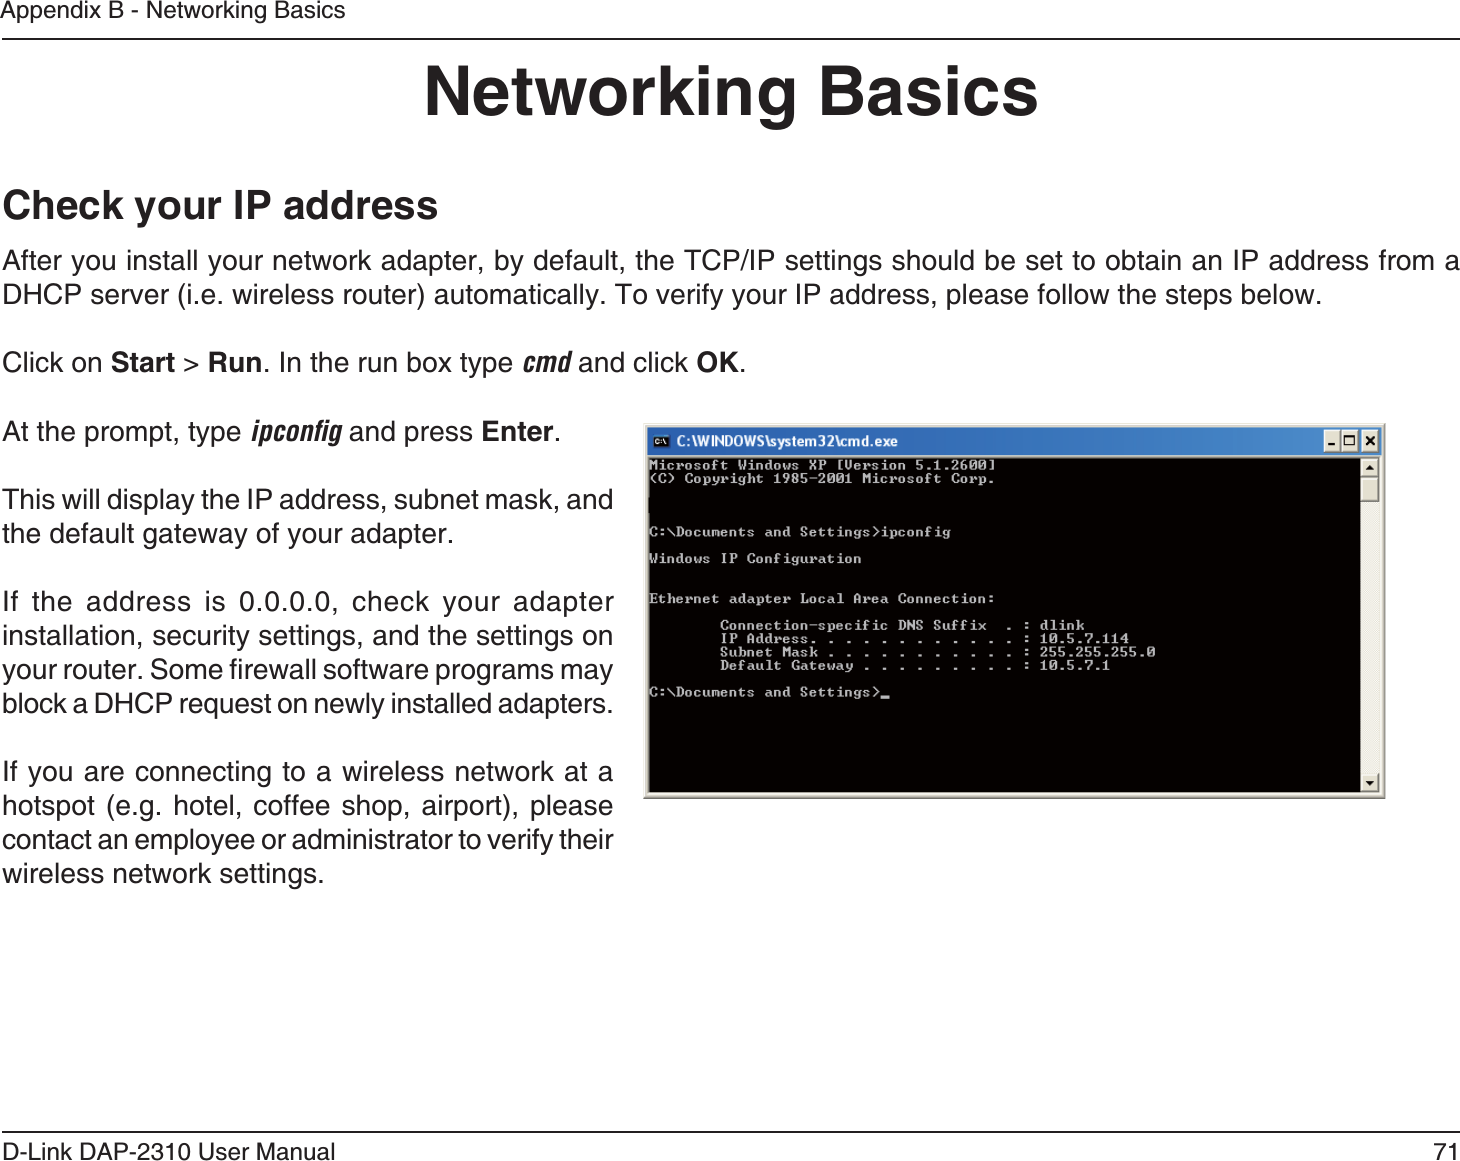 71D-Link DAP-2310 User ManualAppendix B - Networking BasicsNetworking BasicsCheck your IP addressAfter you install your network adapter, by default, the TCP/IP settings should be set to obtain an IP address from a Click on Start &gt; Run. In the run box type cmd and click OK.At the prompt, type EL?KJłC and press Enter.This will display the IP address, subnet mask, and the default gateway of your adapter.If the address is 0.0.0.0, check your adapter installation, security settings, and the settings on block a DHCP request on newly installed adapters. If you are connecting to a wireless network at a  contact an employee or administrator to verify their wireless network settings.